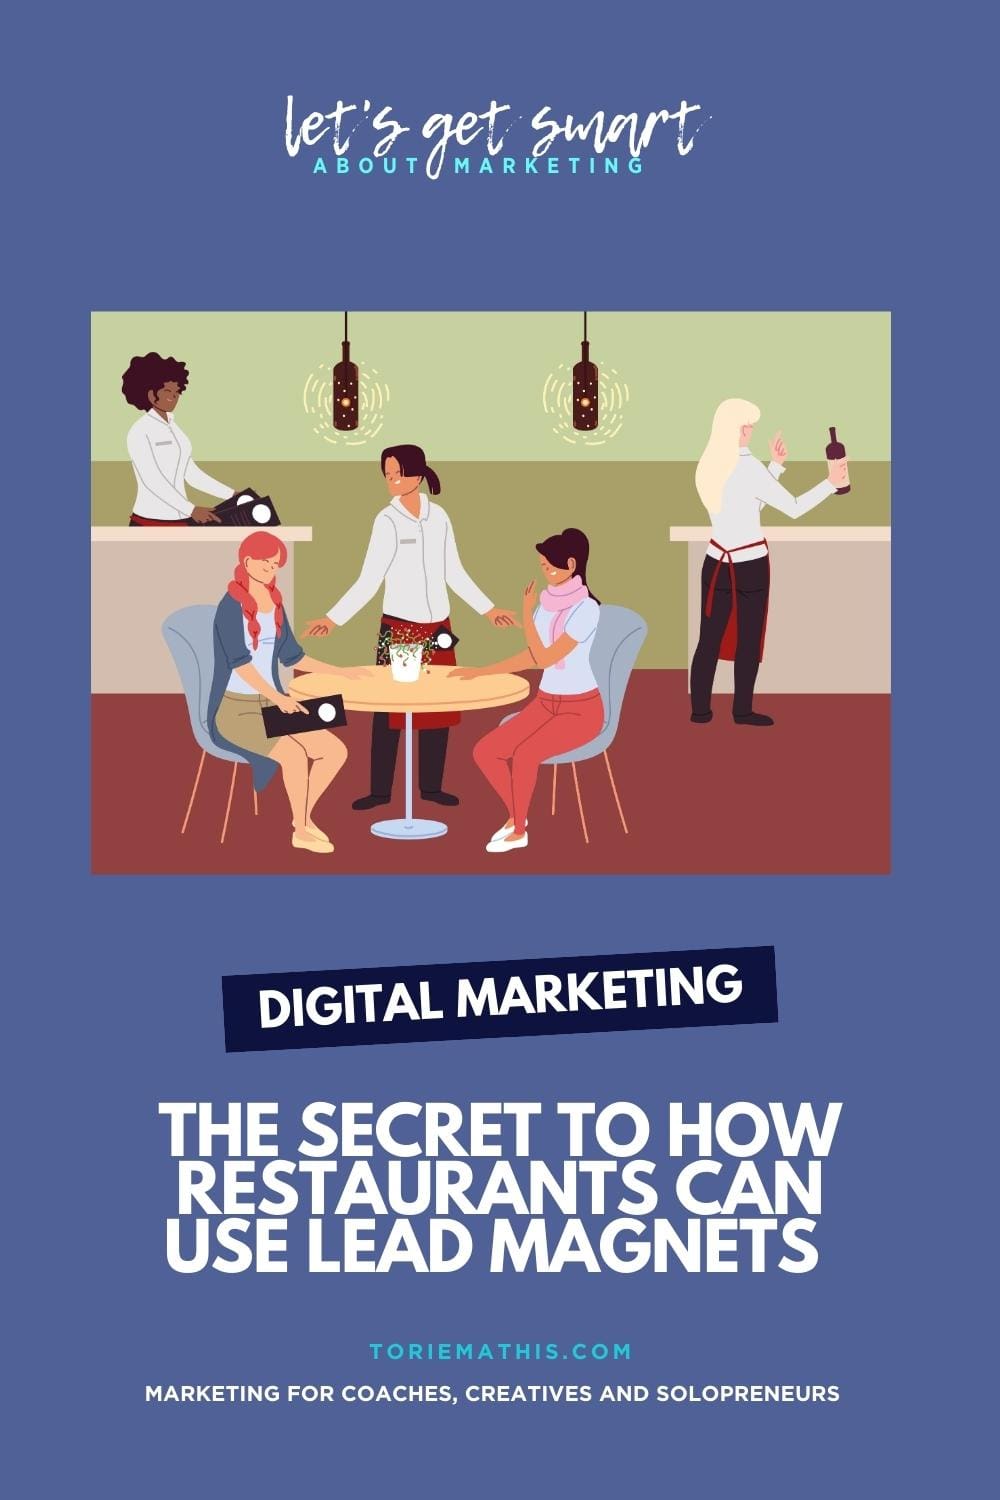 How Restaurants Can Use Lead Magnets to Get More Customers